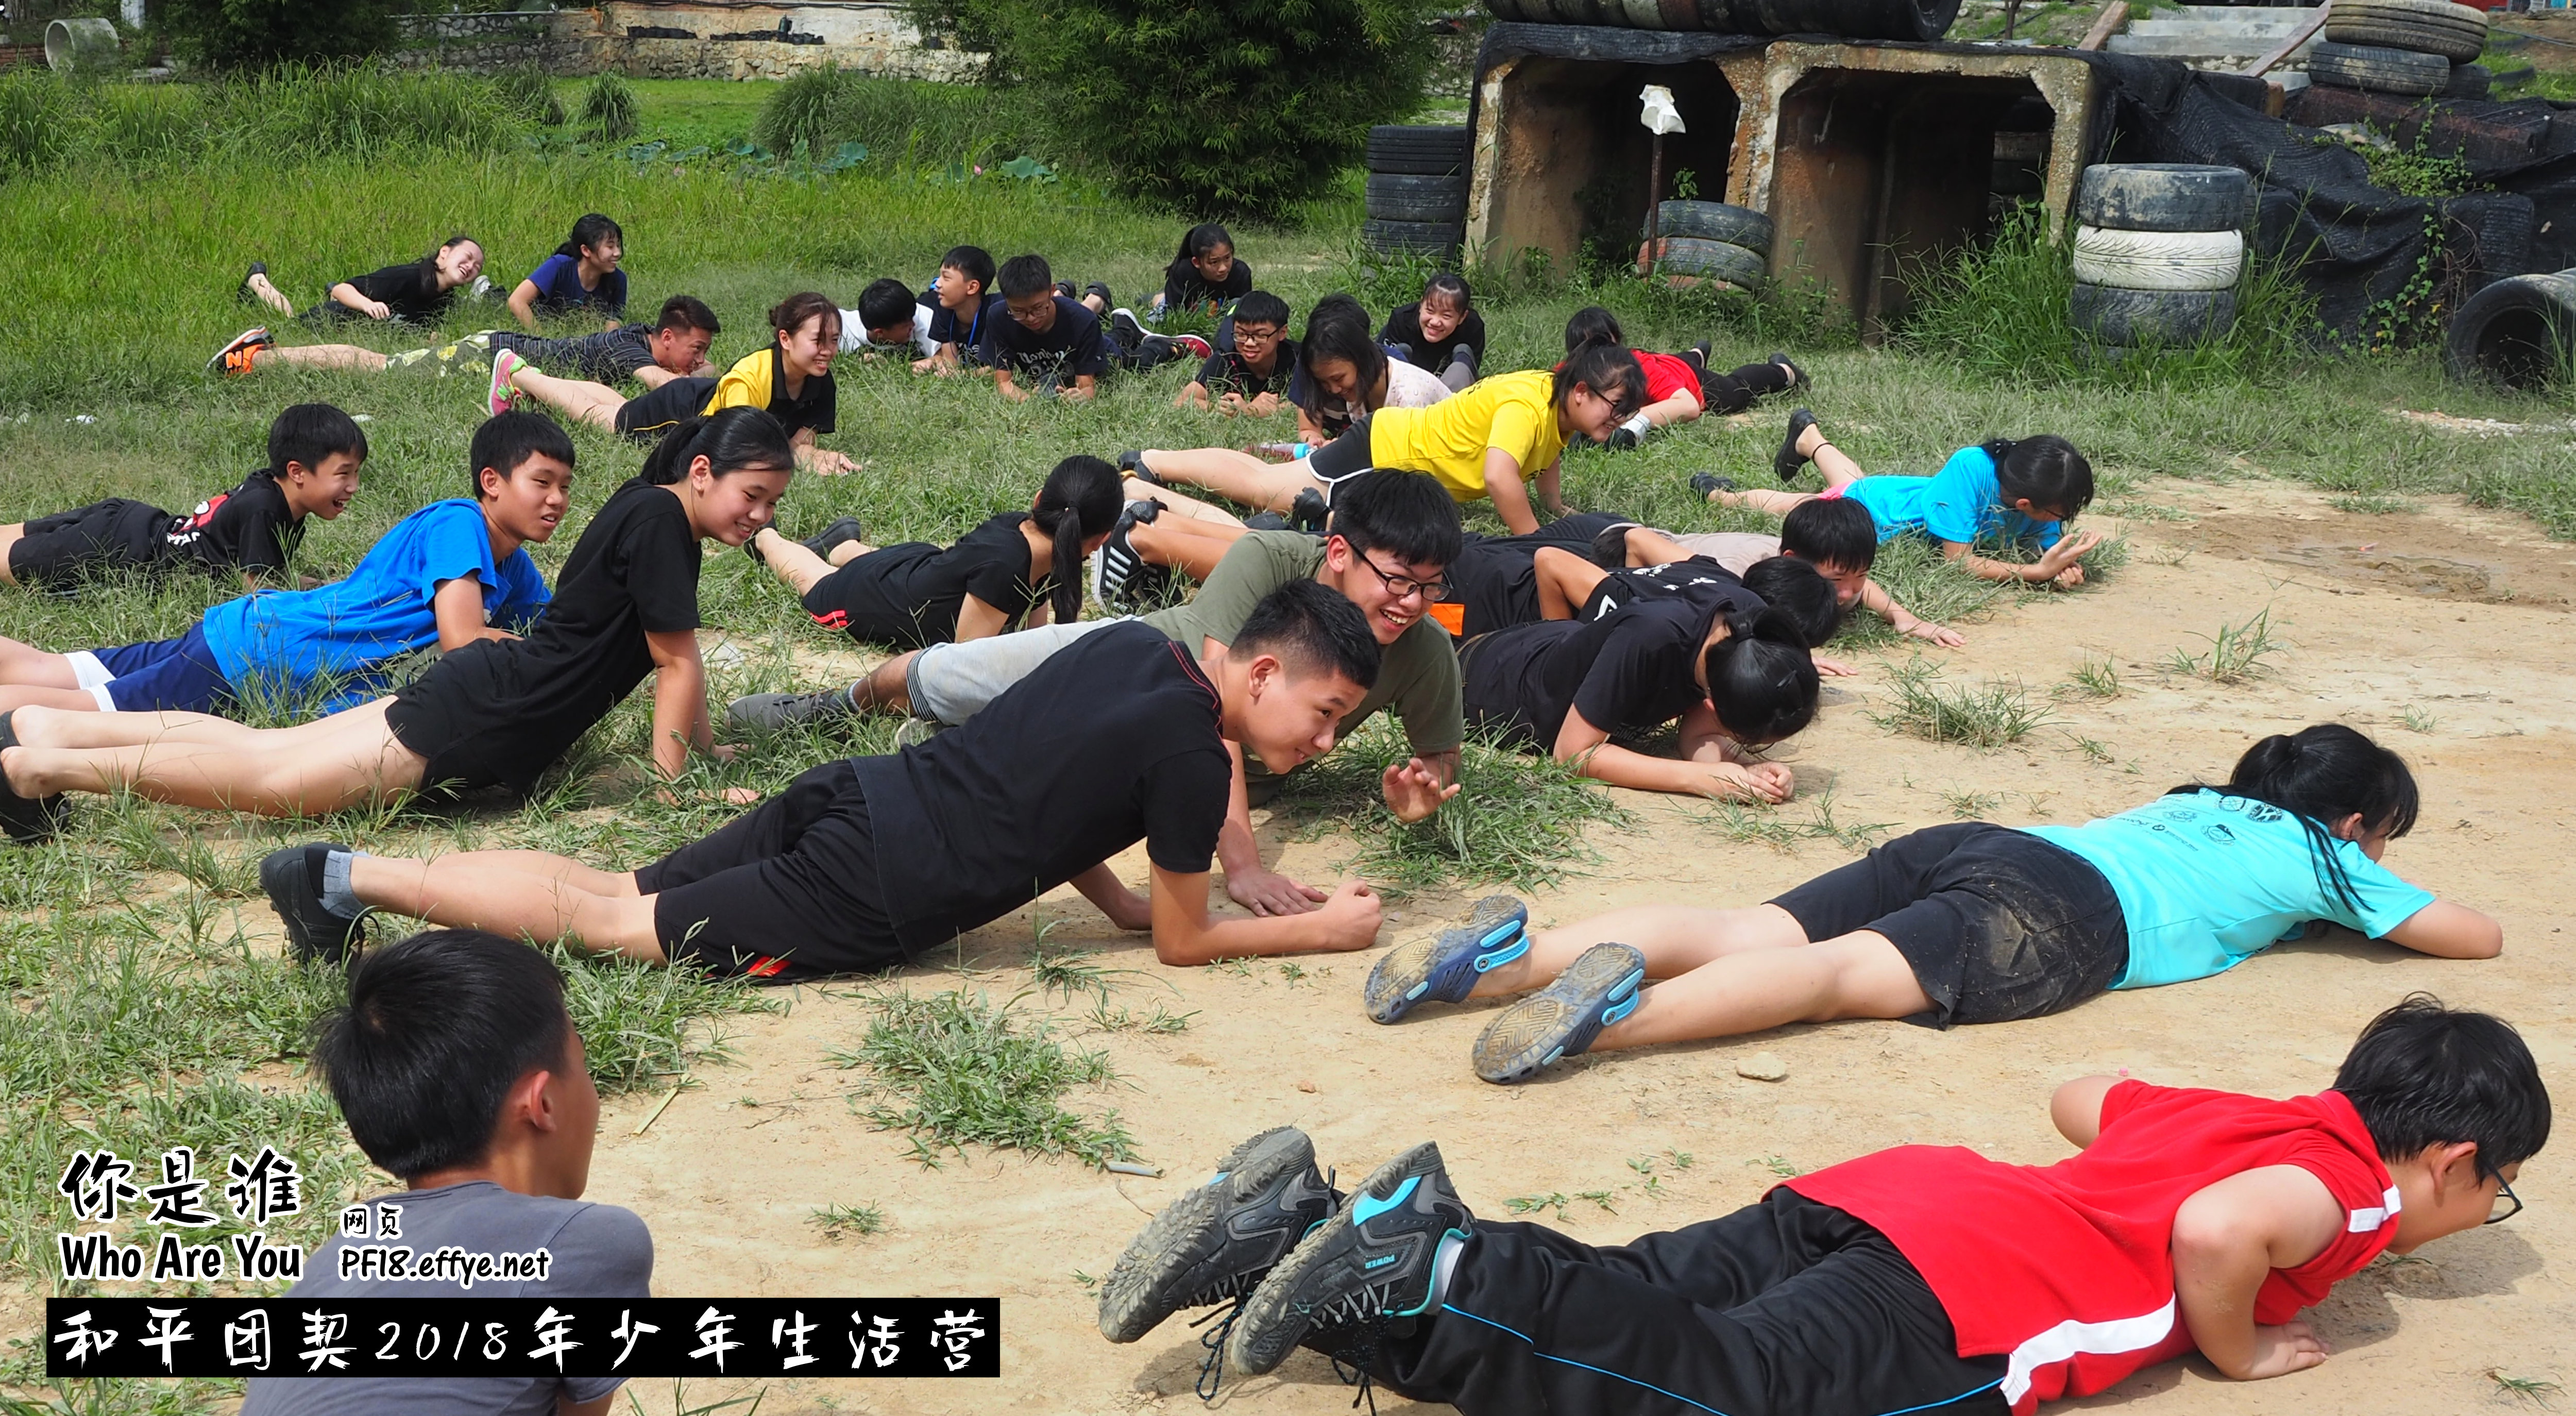 Peace Fellowship Youth Camp 2018 Who Are You 和平团契 2018 年少年生活营 你是谁 A002-016